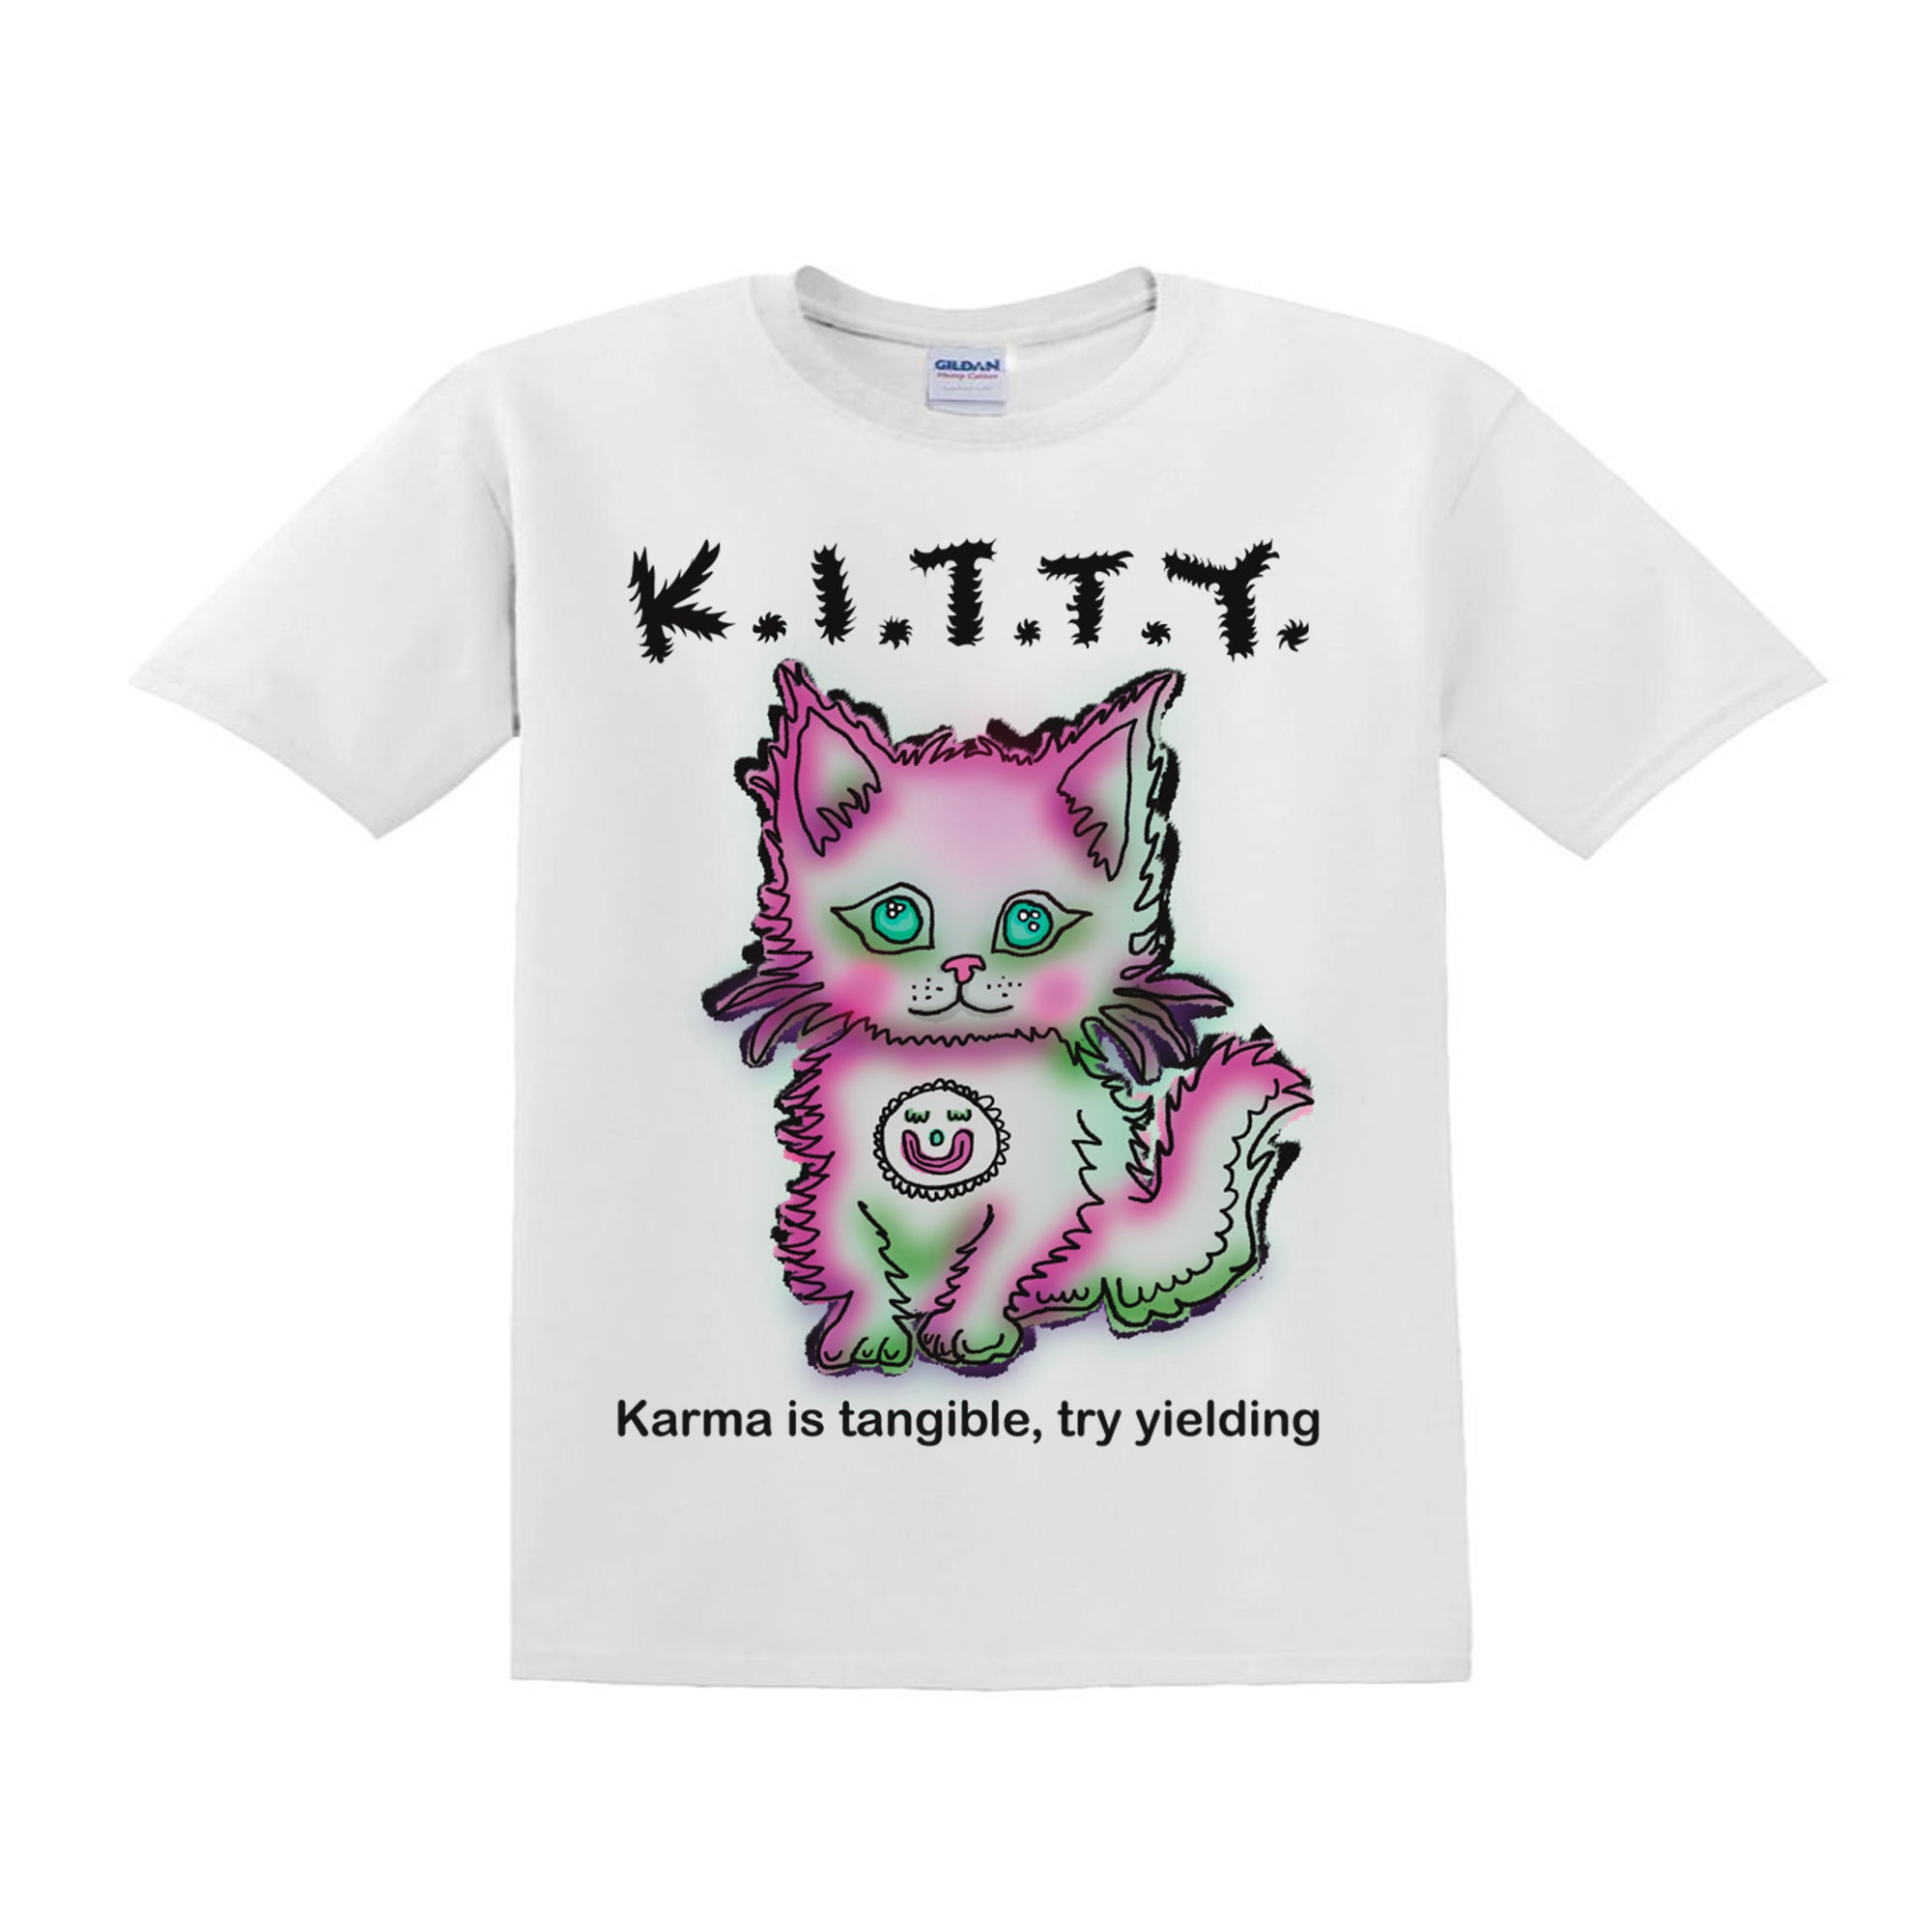 K.I.T.T.Y. Karma Tee (made to order)